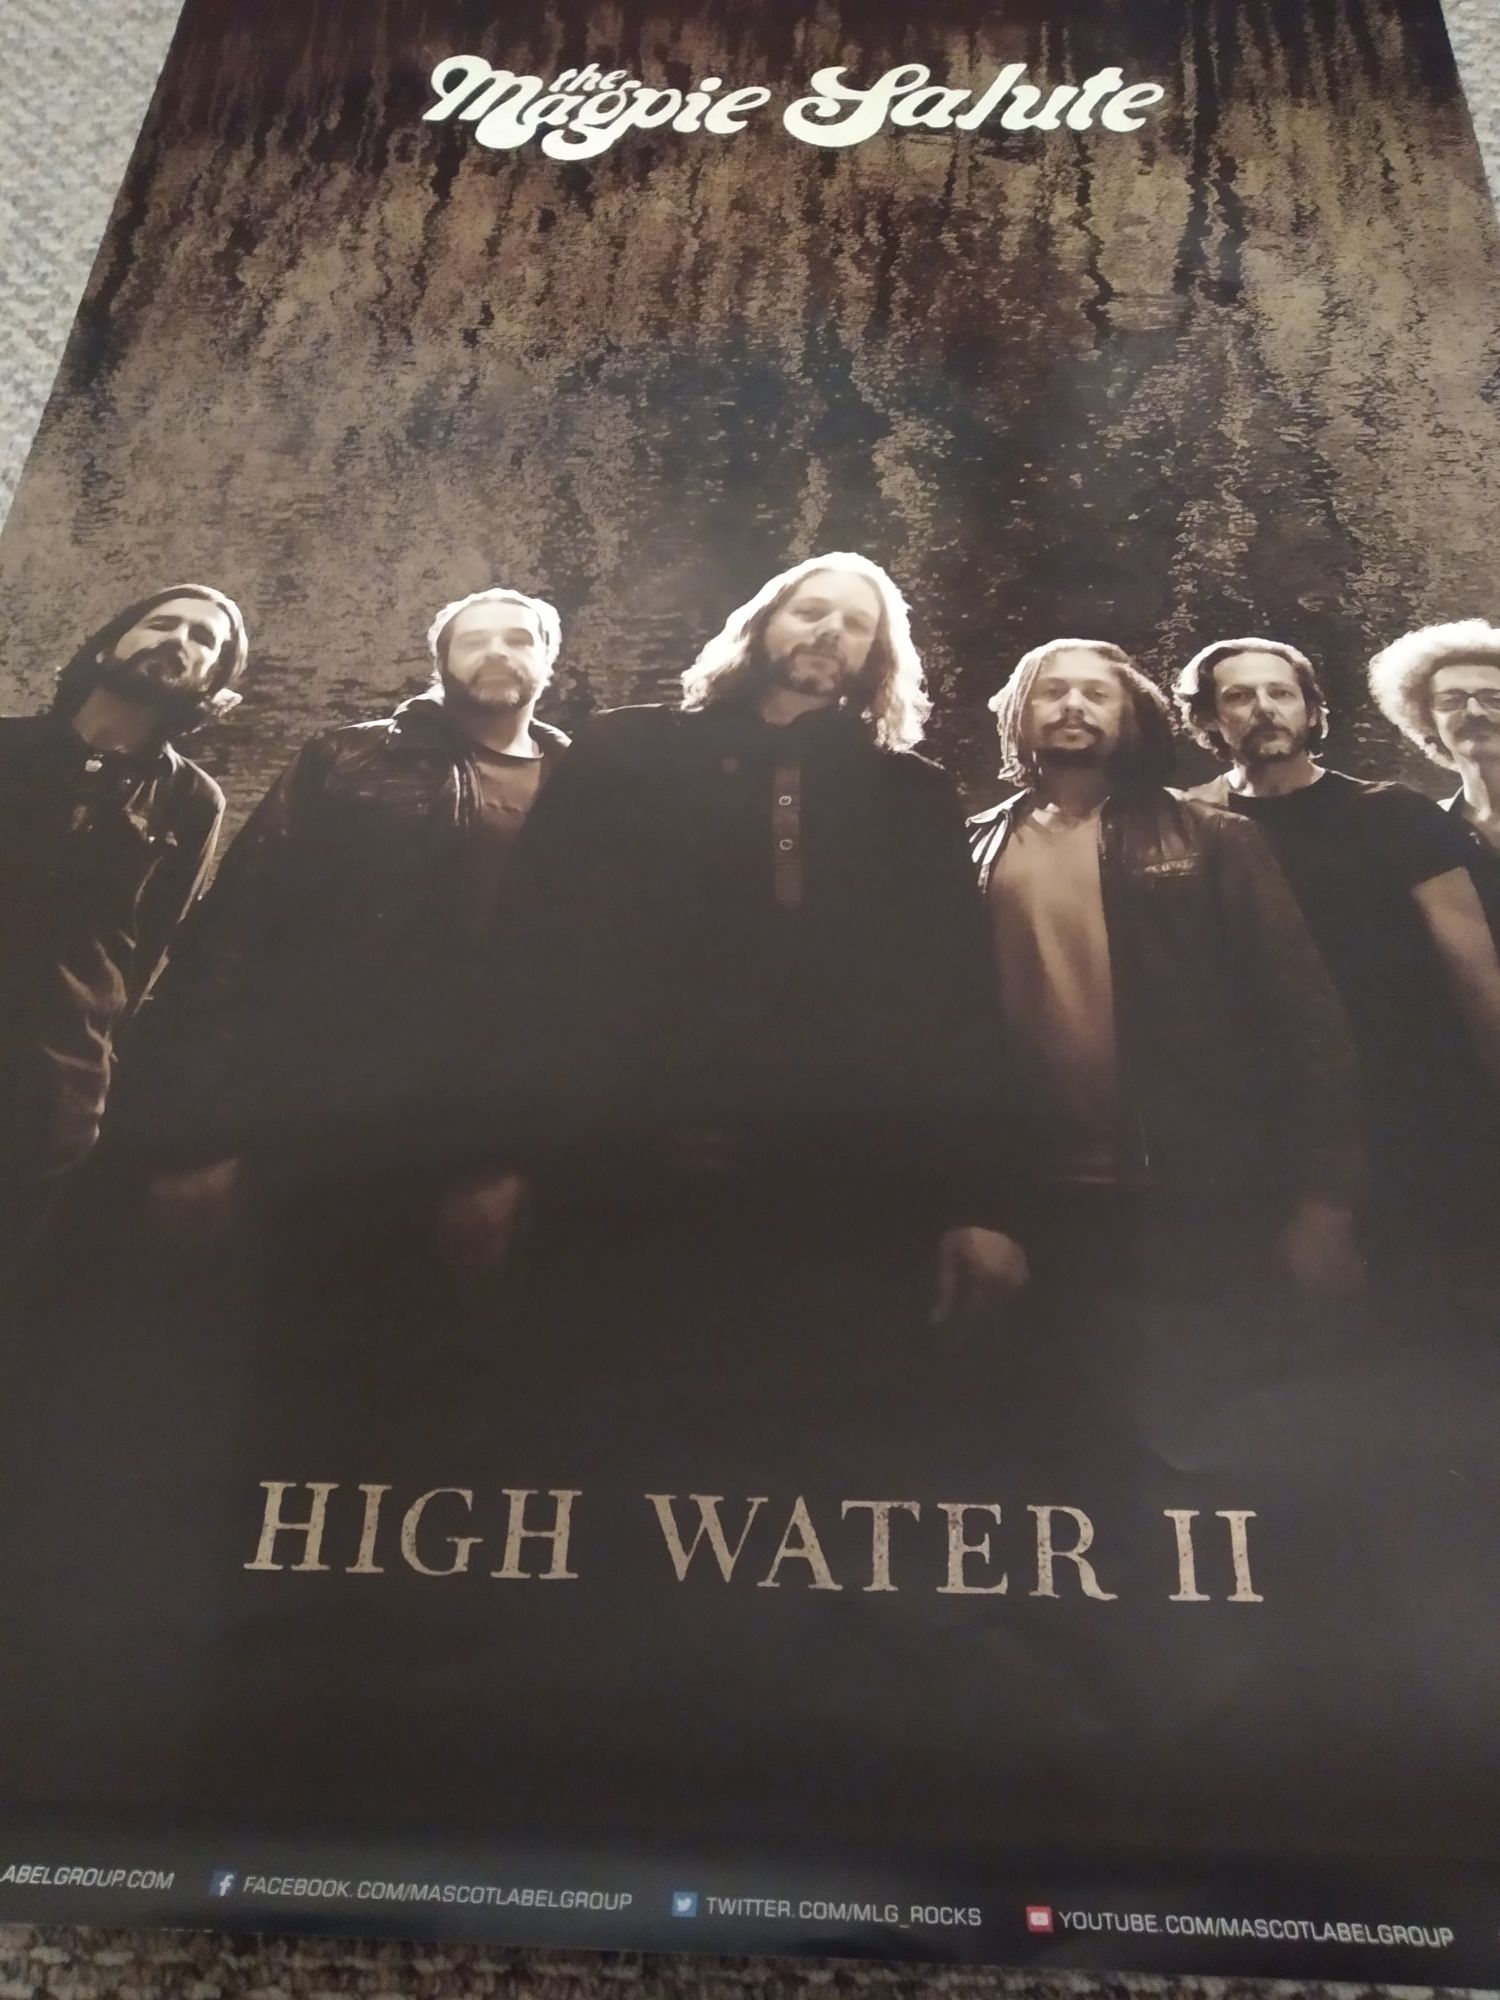 Magpie Salute - High Water II - POSTER